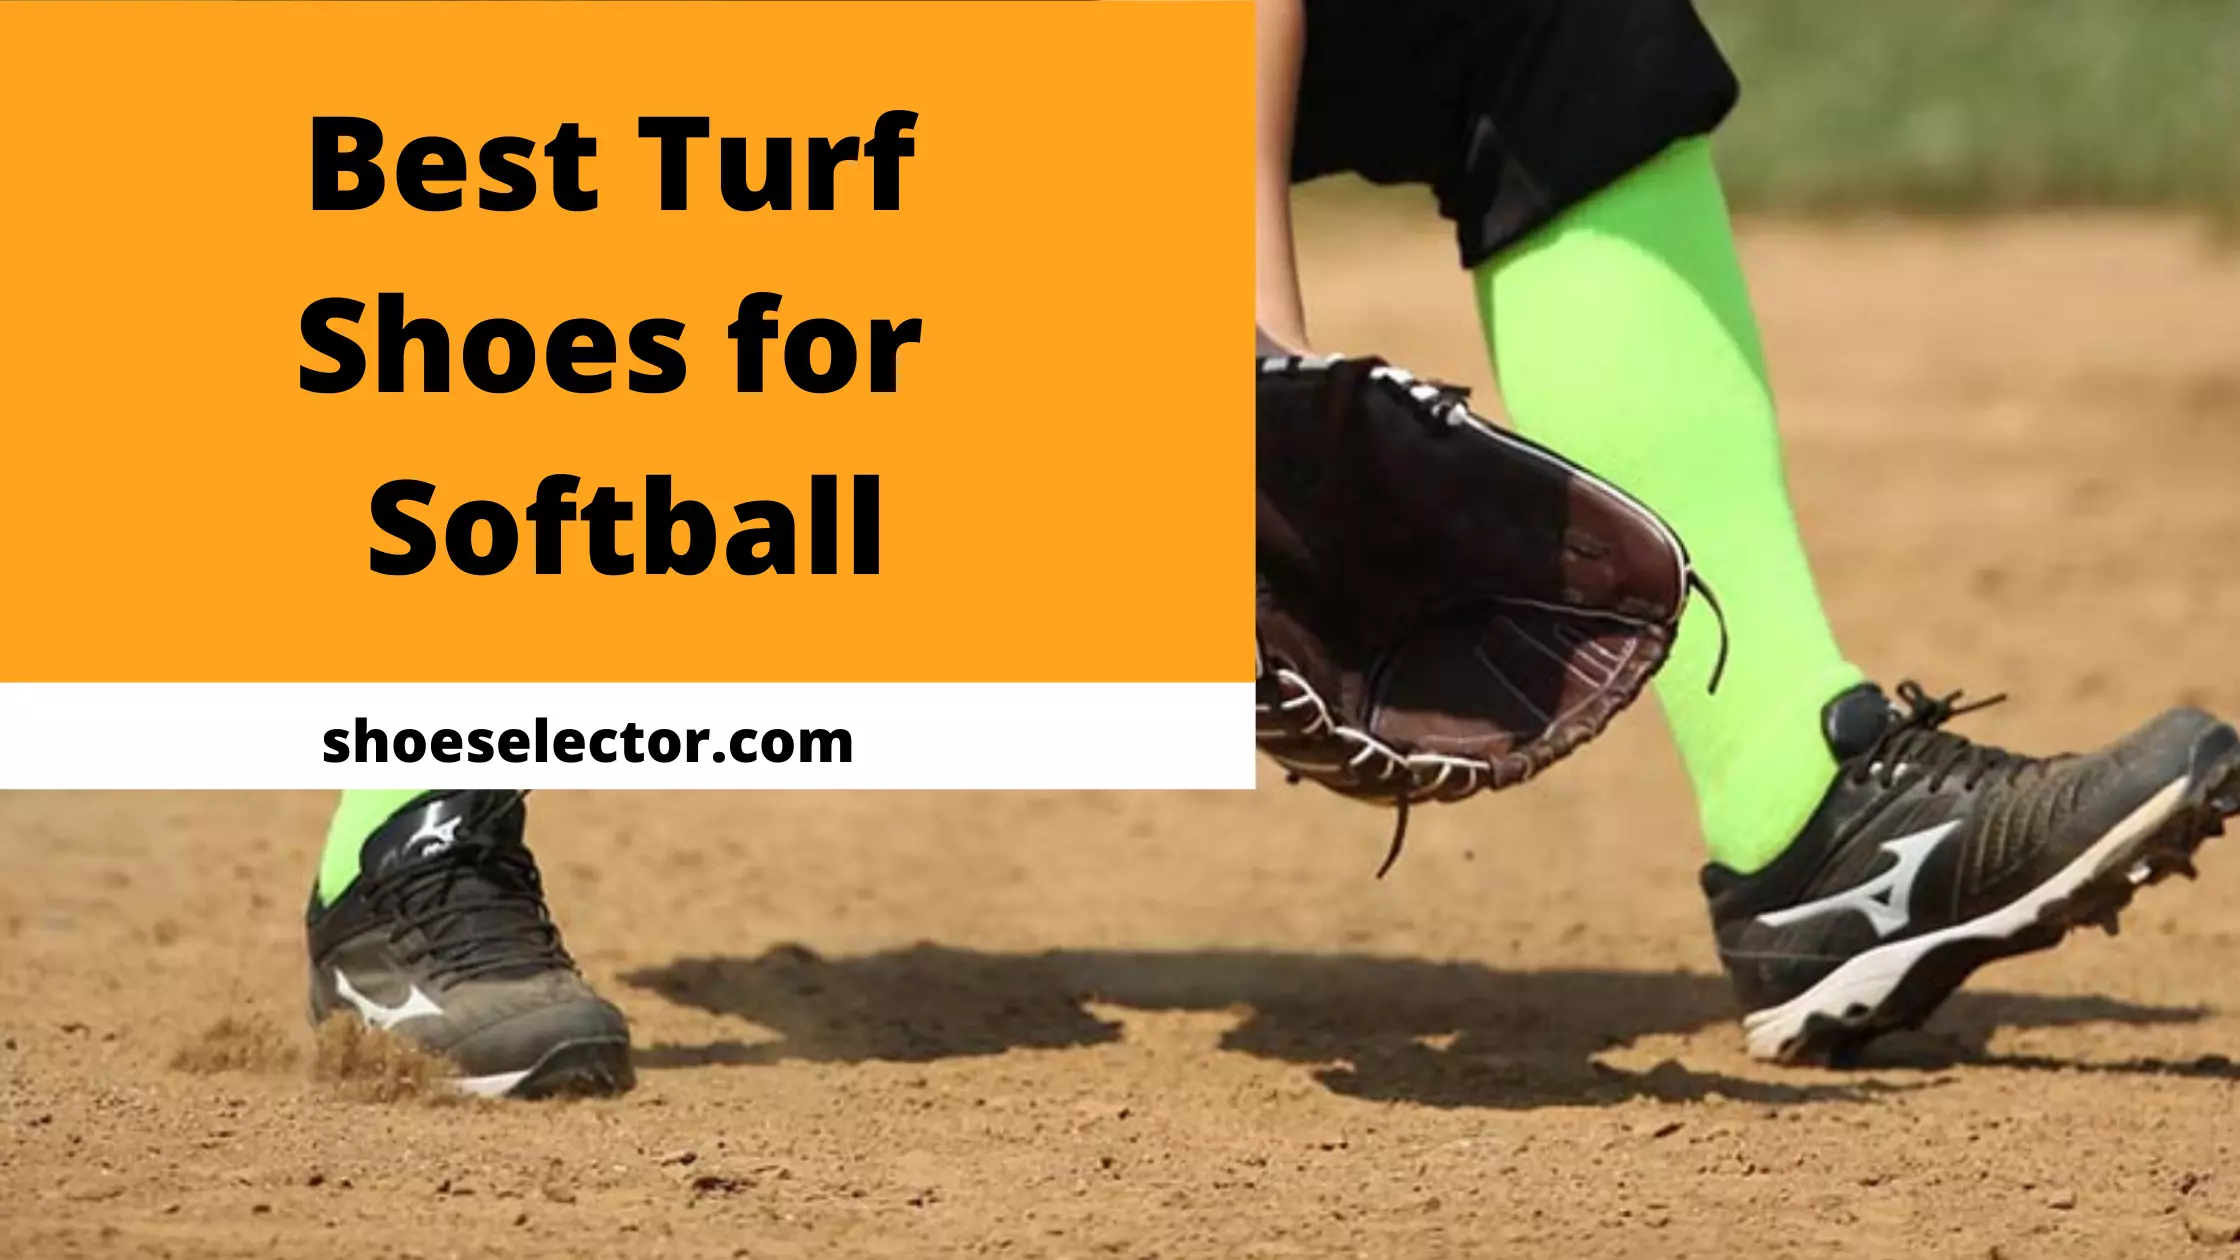 Best Turf Shoes for Softball - Supportive And Stylish